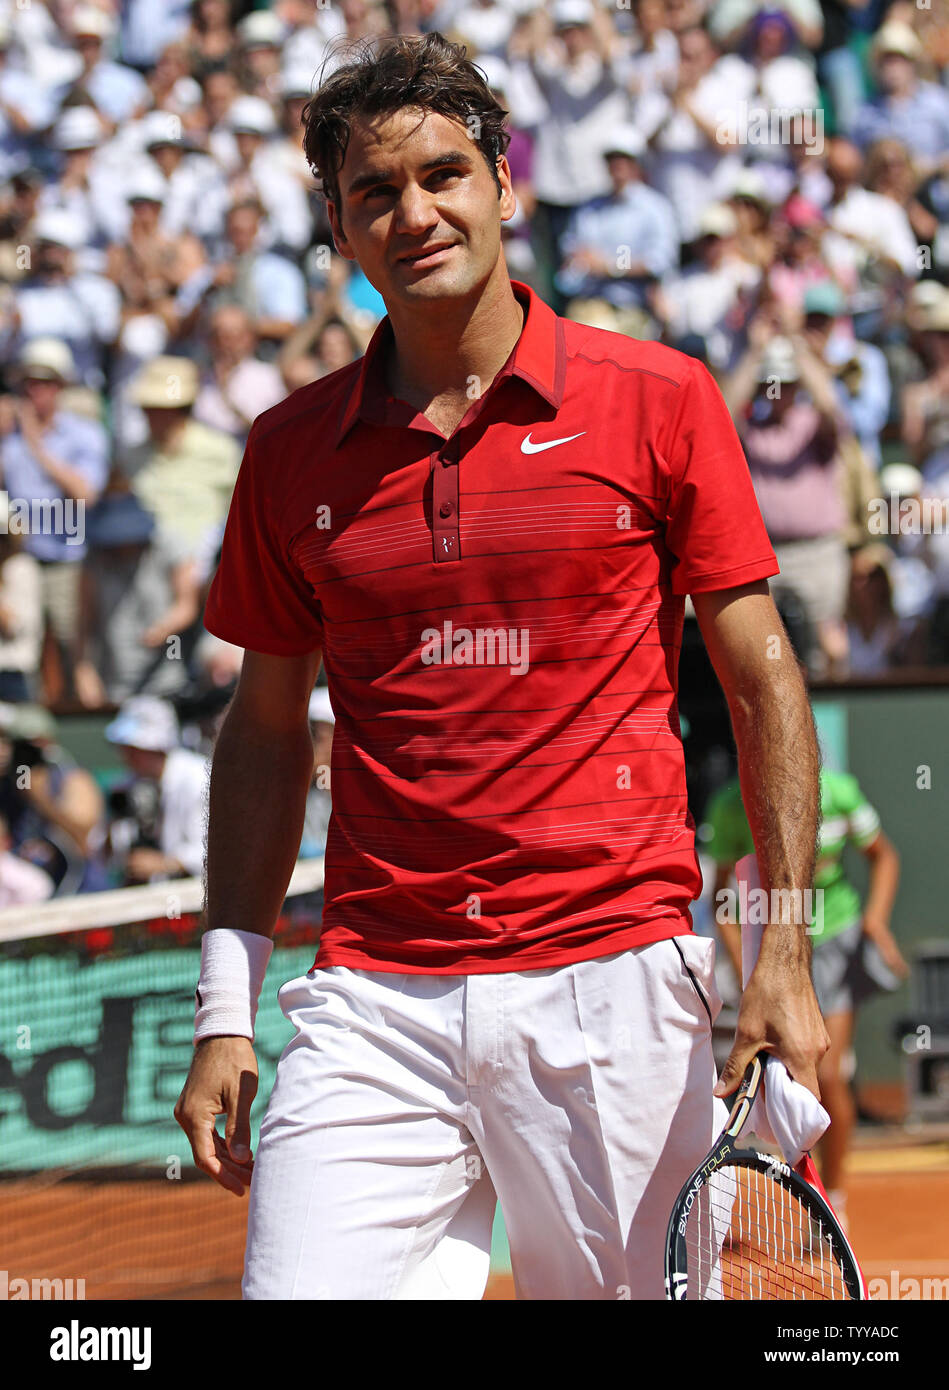 Roger Federer of Switzerland walks off the court after winning his French  Open mens fourth round match against Stanislas Wawrinka of Switzerland at Roland  Garros in Paris on May 29, 2011. Federer